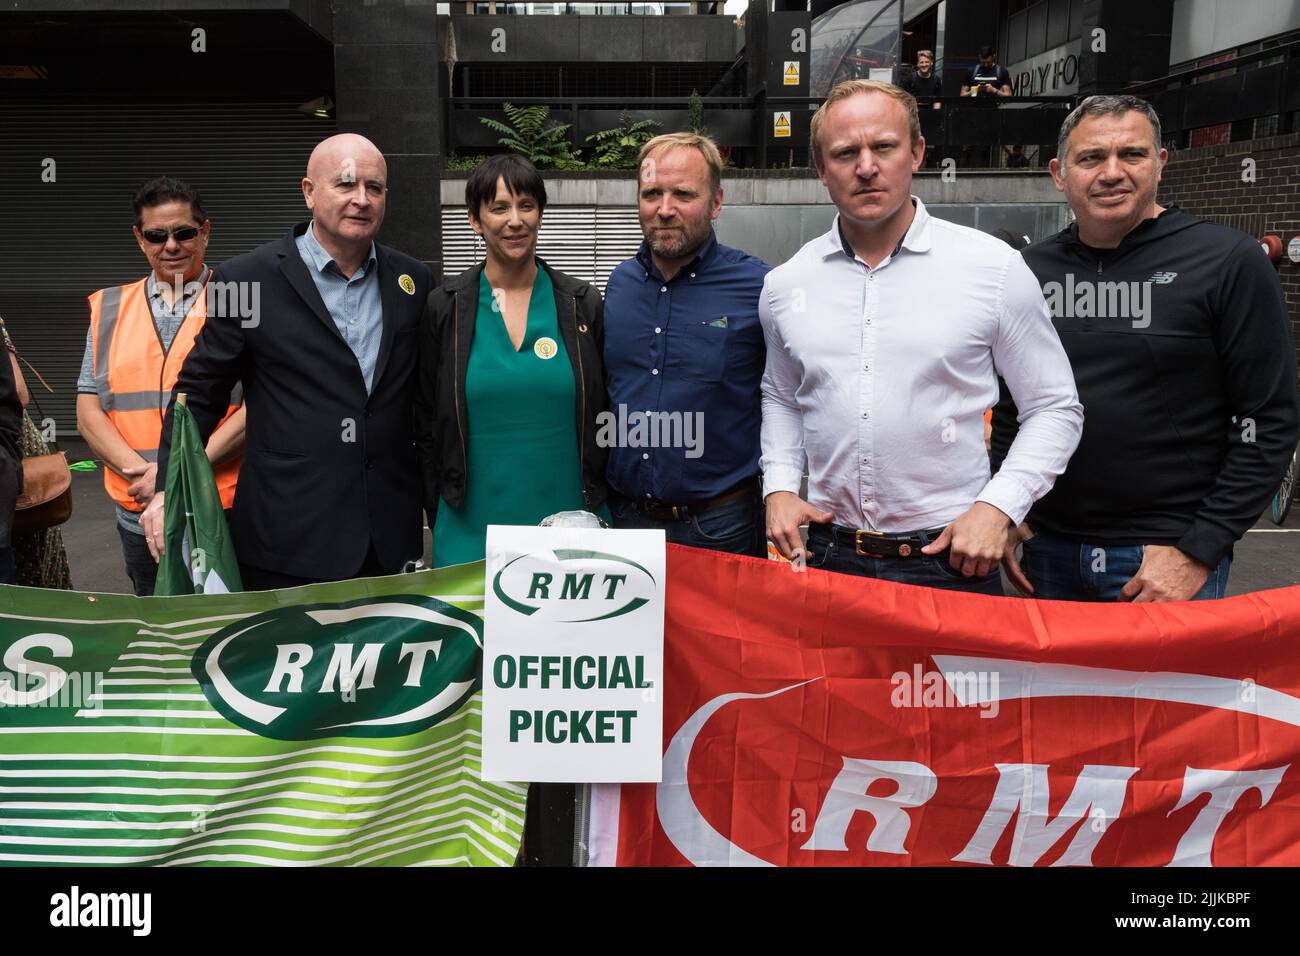 London, UK. 27th July, 2022. General Secretary of the National Union of Rail, Maritime and Transport Workers (RMT) Mick Lynch (2L) and Shadow Transport Minister Sam Tarry (2R) join RMT picket line outside Euston Station as railway workers stage a 24-hour walk-out. More than 40,000 workers from 14 train operating companies and Network Rail are taking part in the industrial action, called by the RMT (The National Union of Rail, Maritime and Transport Workers), as part of an ongoing dispute over pay, jobs and conditions following three days of strikes in June. Credit: Wiktor Szymanowicz/Alamy Liv Stock Photo